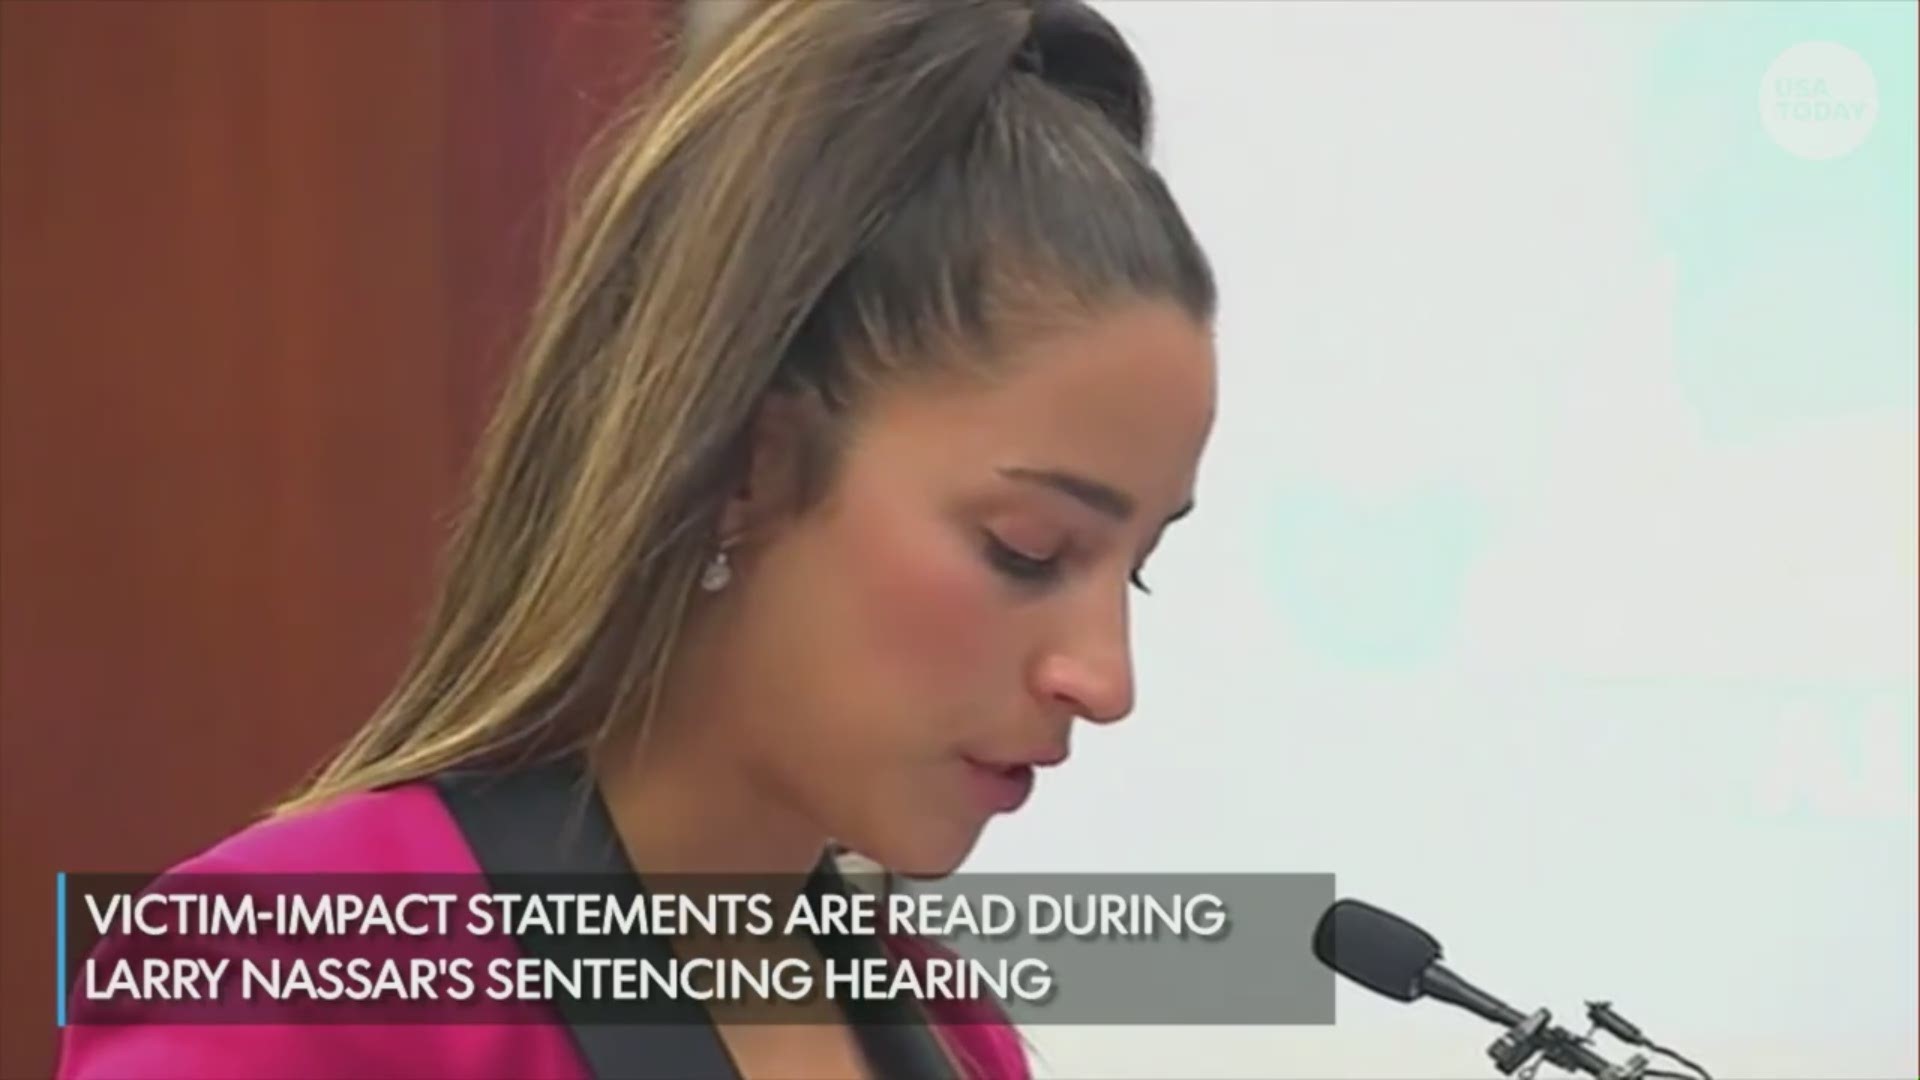 USA Gymnasts Aly Raisman and Jordyn Weiber addressed their abuser, Larry Nassar, at his sentence hearing. USA TODAY Sports